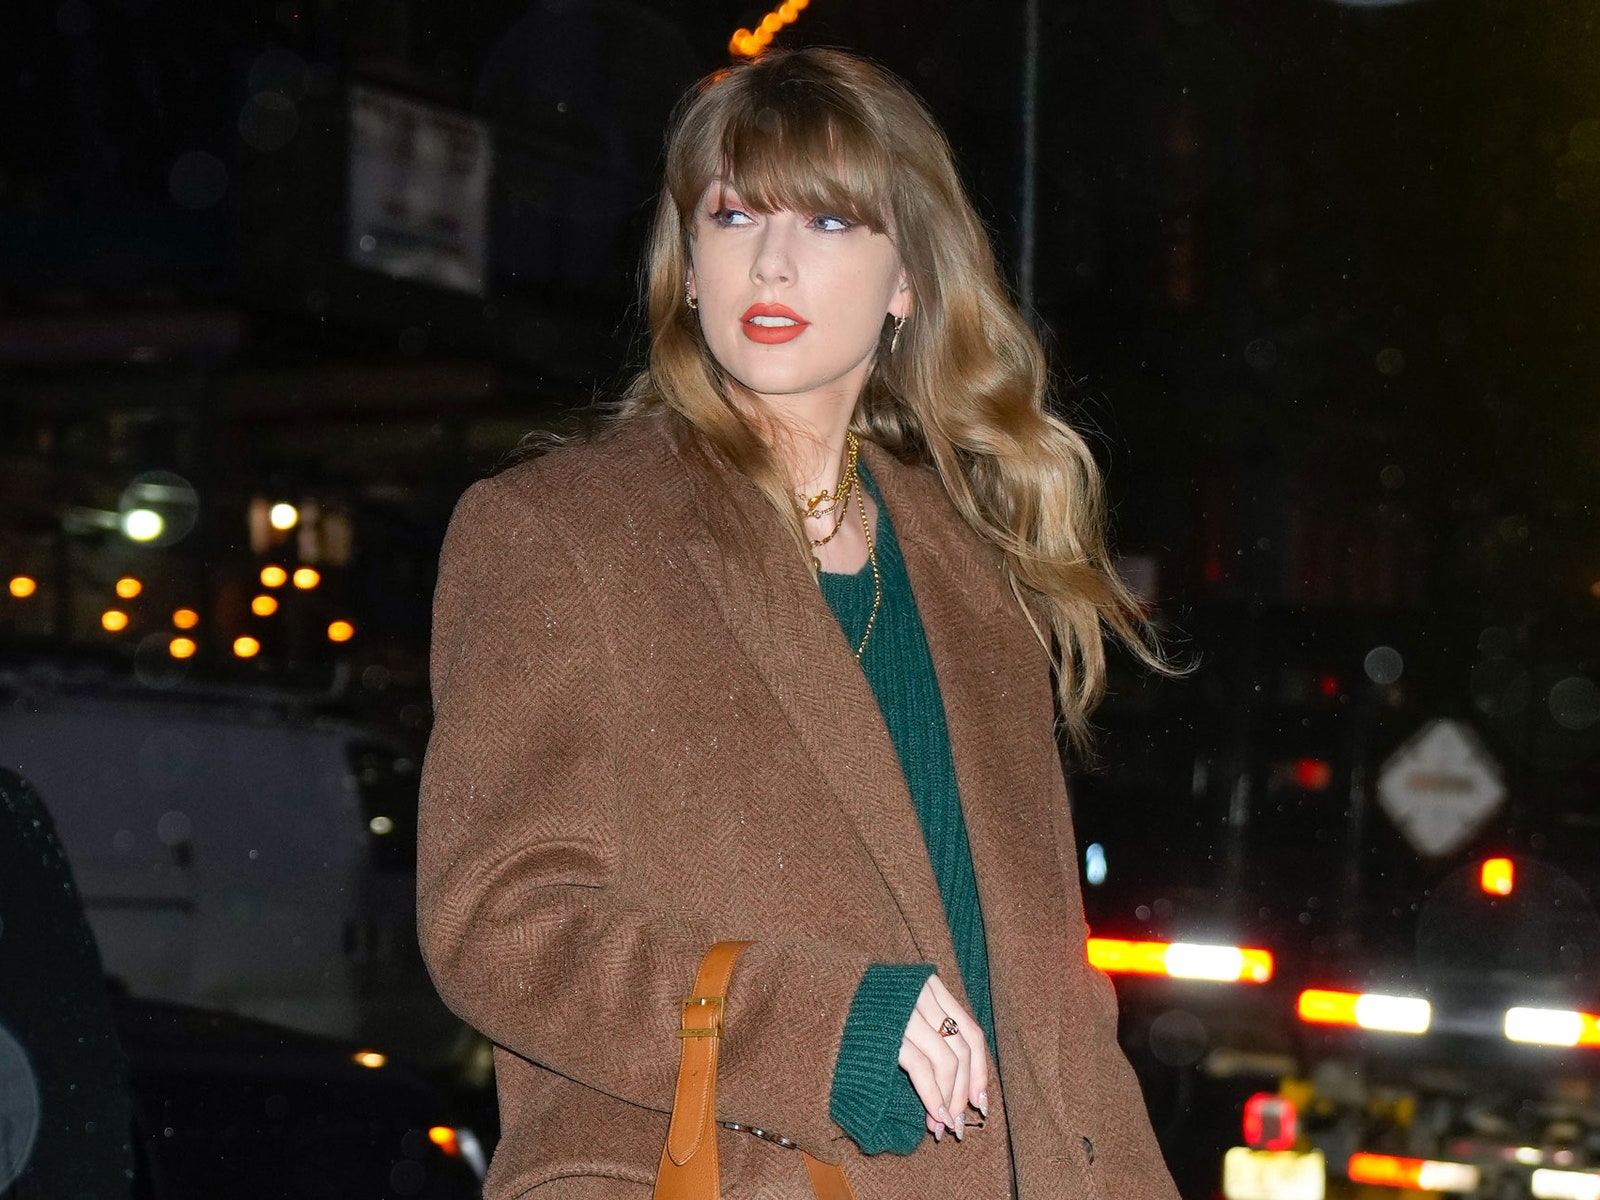 Taylor Swift's green jumper dress and brown coat combo screams Evermore to me